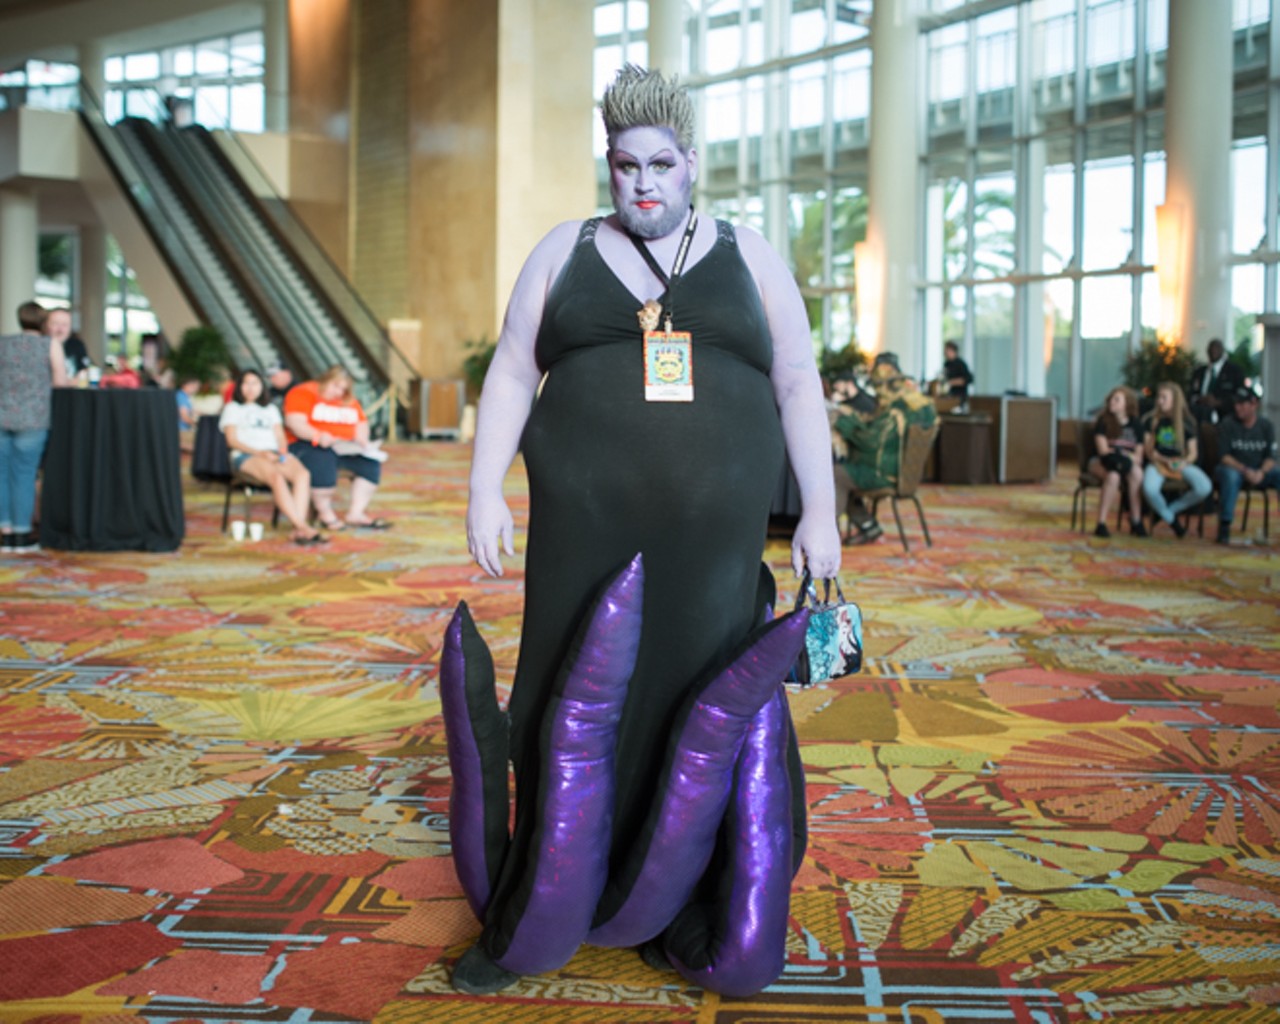 Our favorite costumes from Spooky Empire&#146;s Ultimate Halloween WeekendPhoto by Bernard Wilchusky